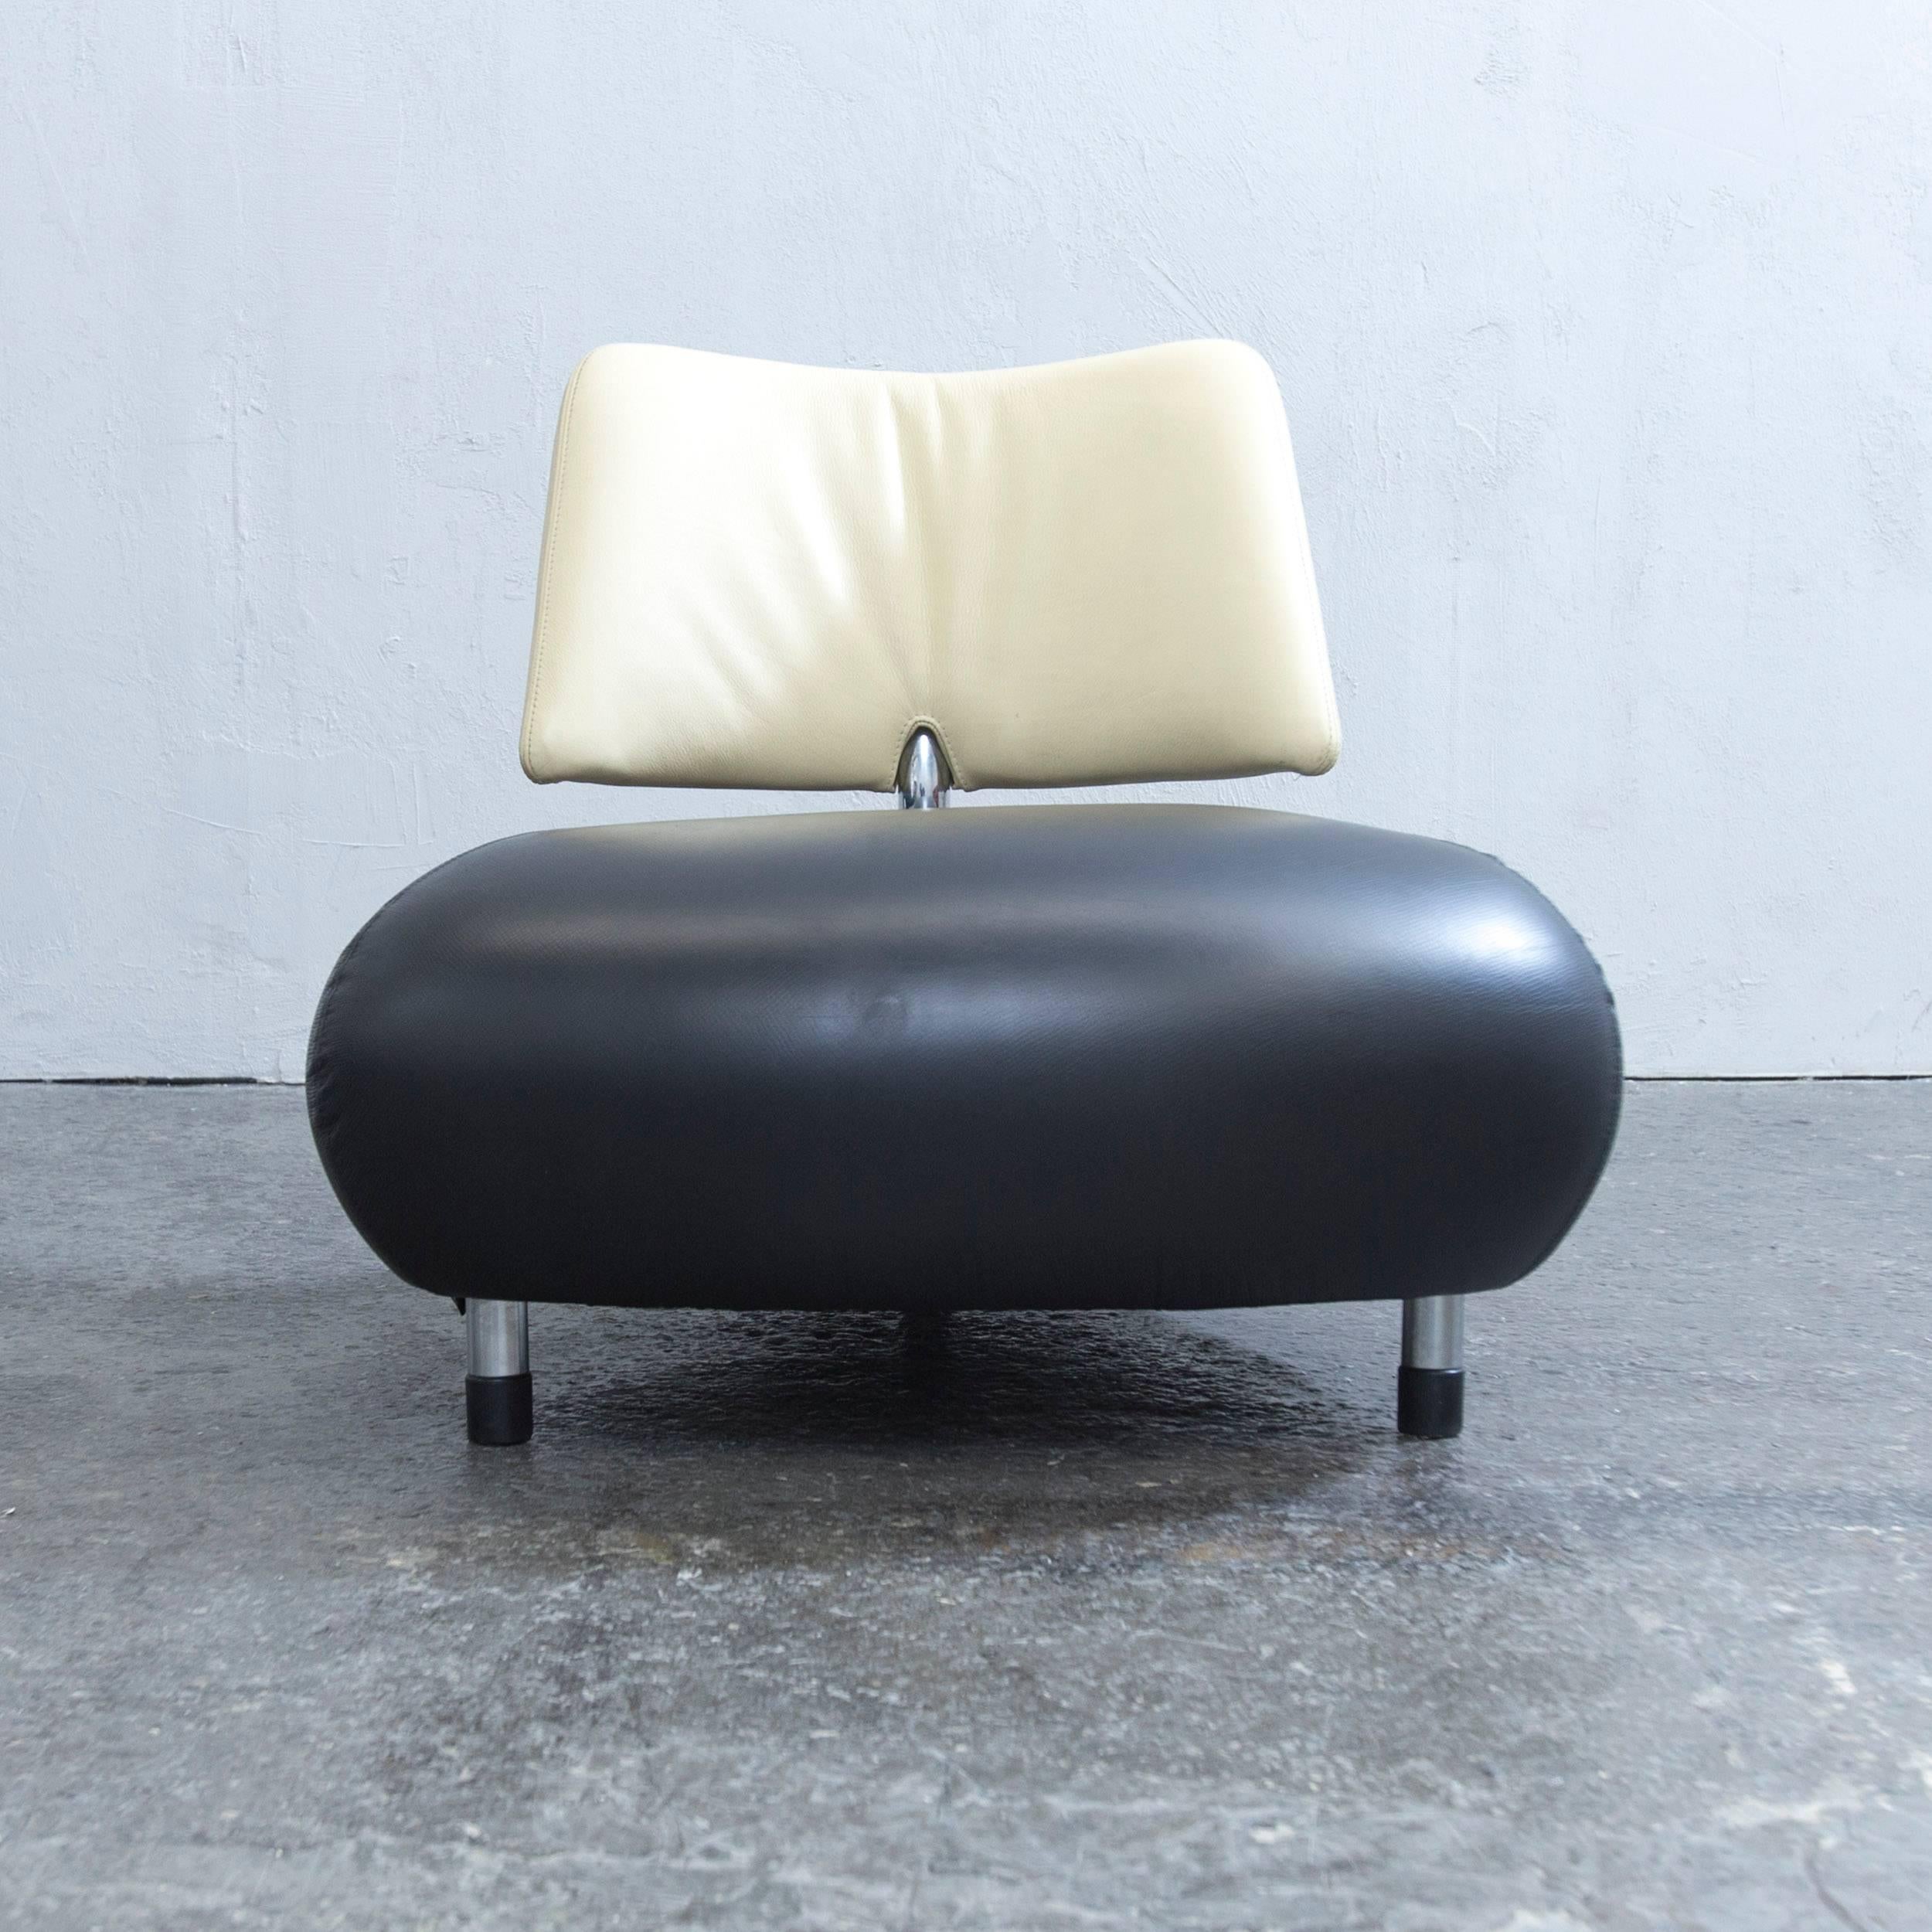 Black and beige colored original Leolux Pallone Pa designer leather chair in a minimalistic and modern design, made for pure comfort.